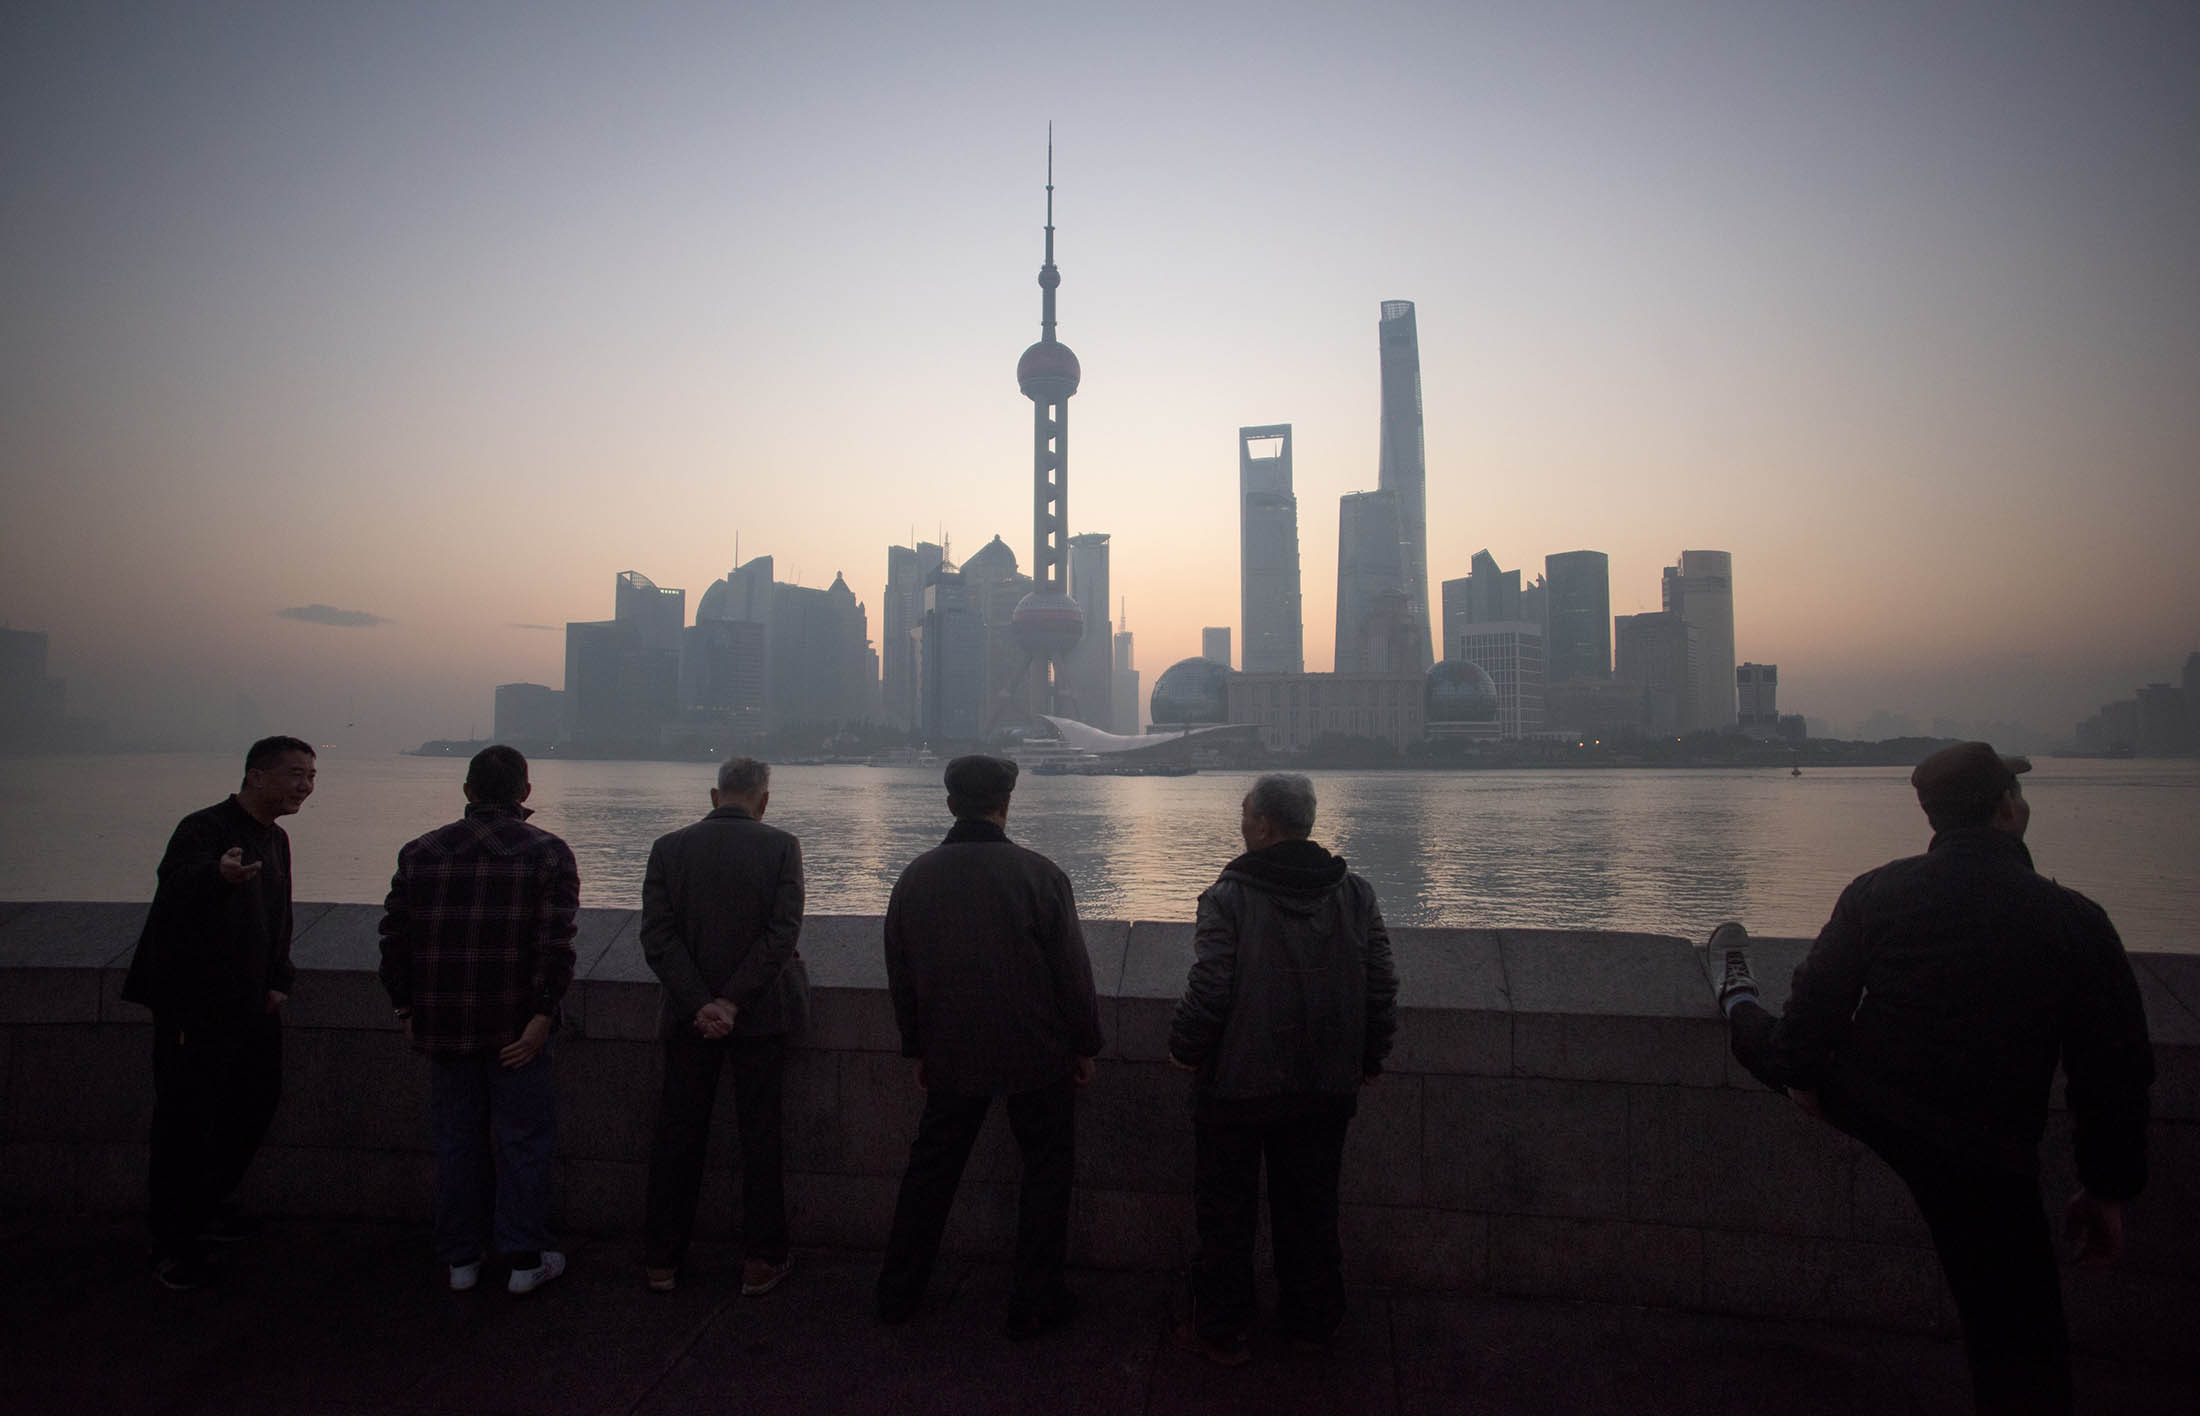 Elderly men stand together in front of the skyline of the Lujiazui Financial District in Pudong in Shanghai at dawn on December 1, 2015. AFP PHOTO / JOHANNES EISELE / AFP / JOHANNES EISELE (Photo credit should read JOHANNES EISELE/AFP/Getty Images)
